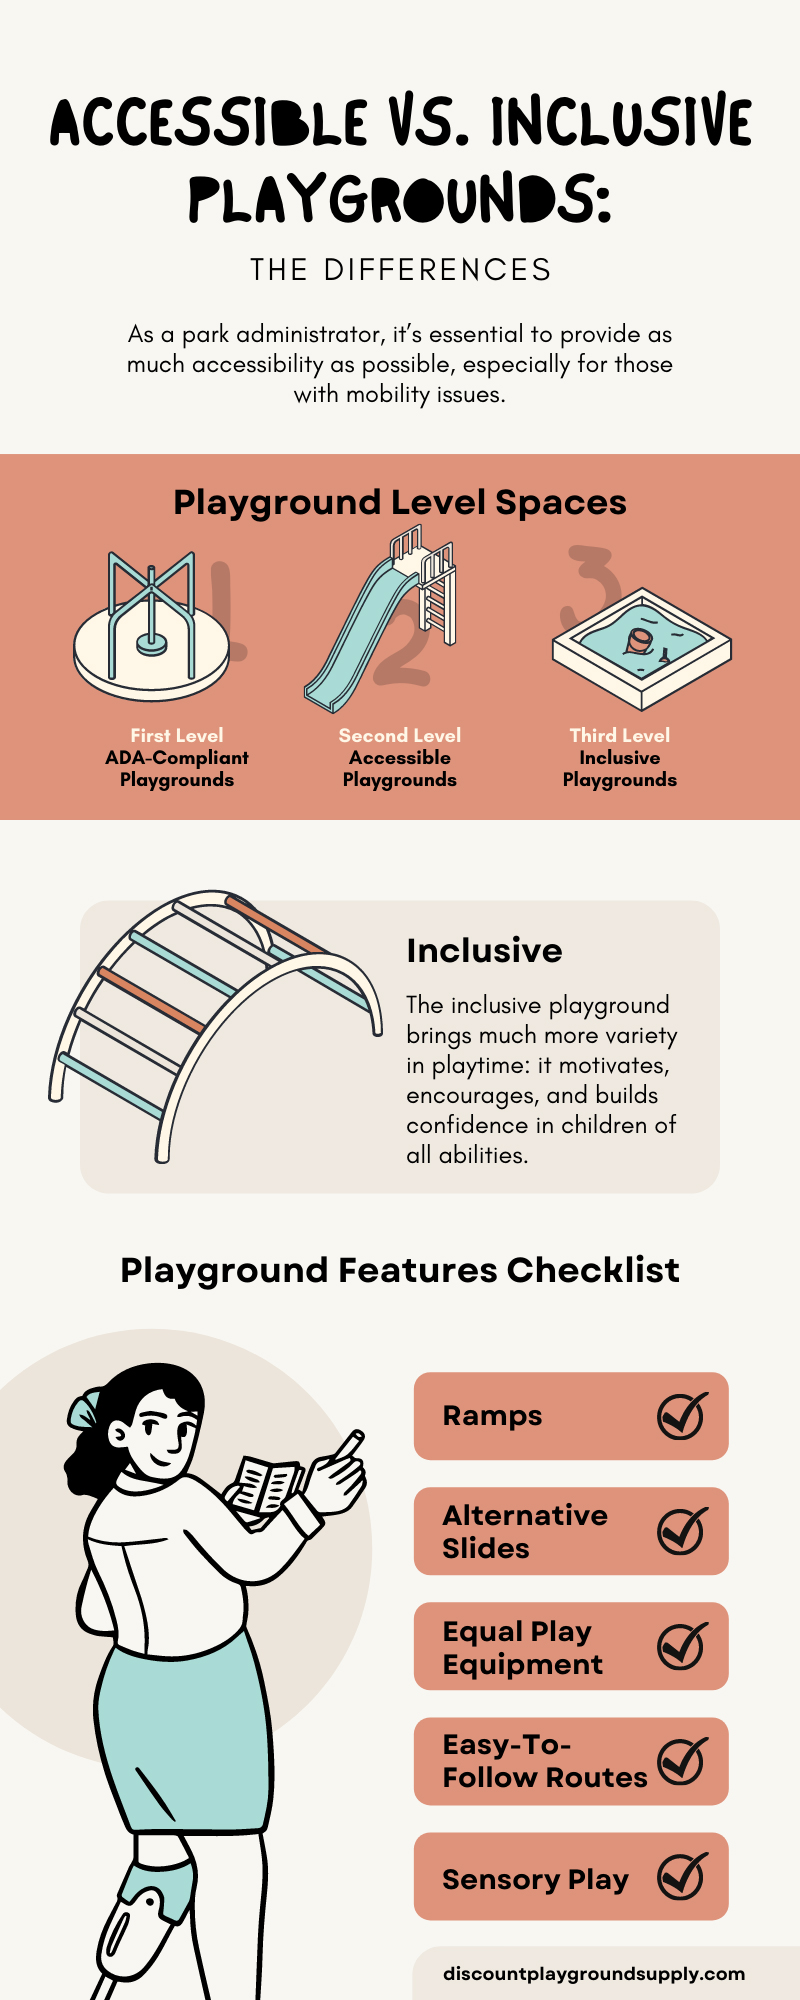 Accessible vs. Inclusive Playgrounds: The Differences